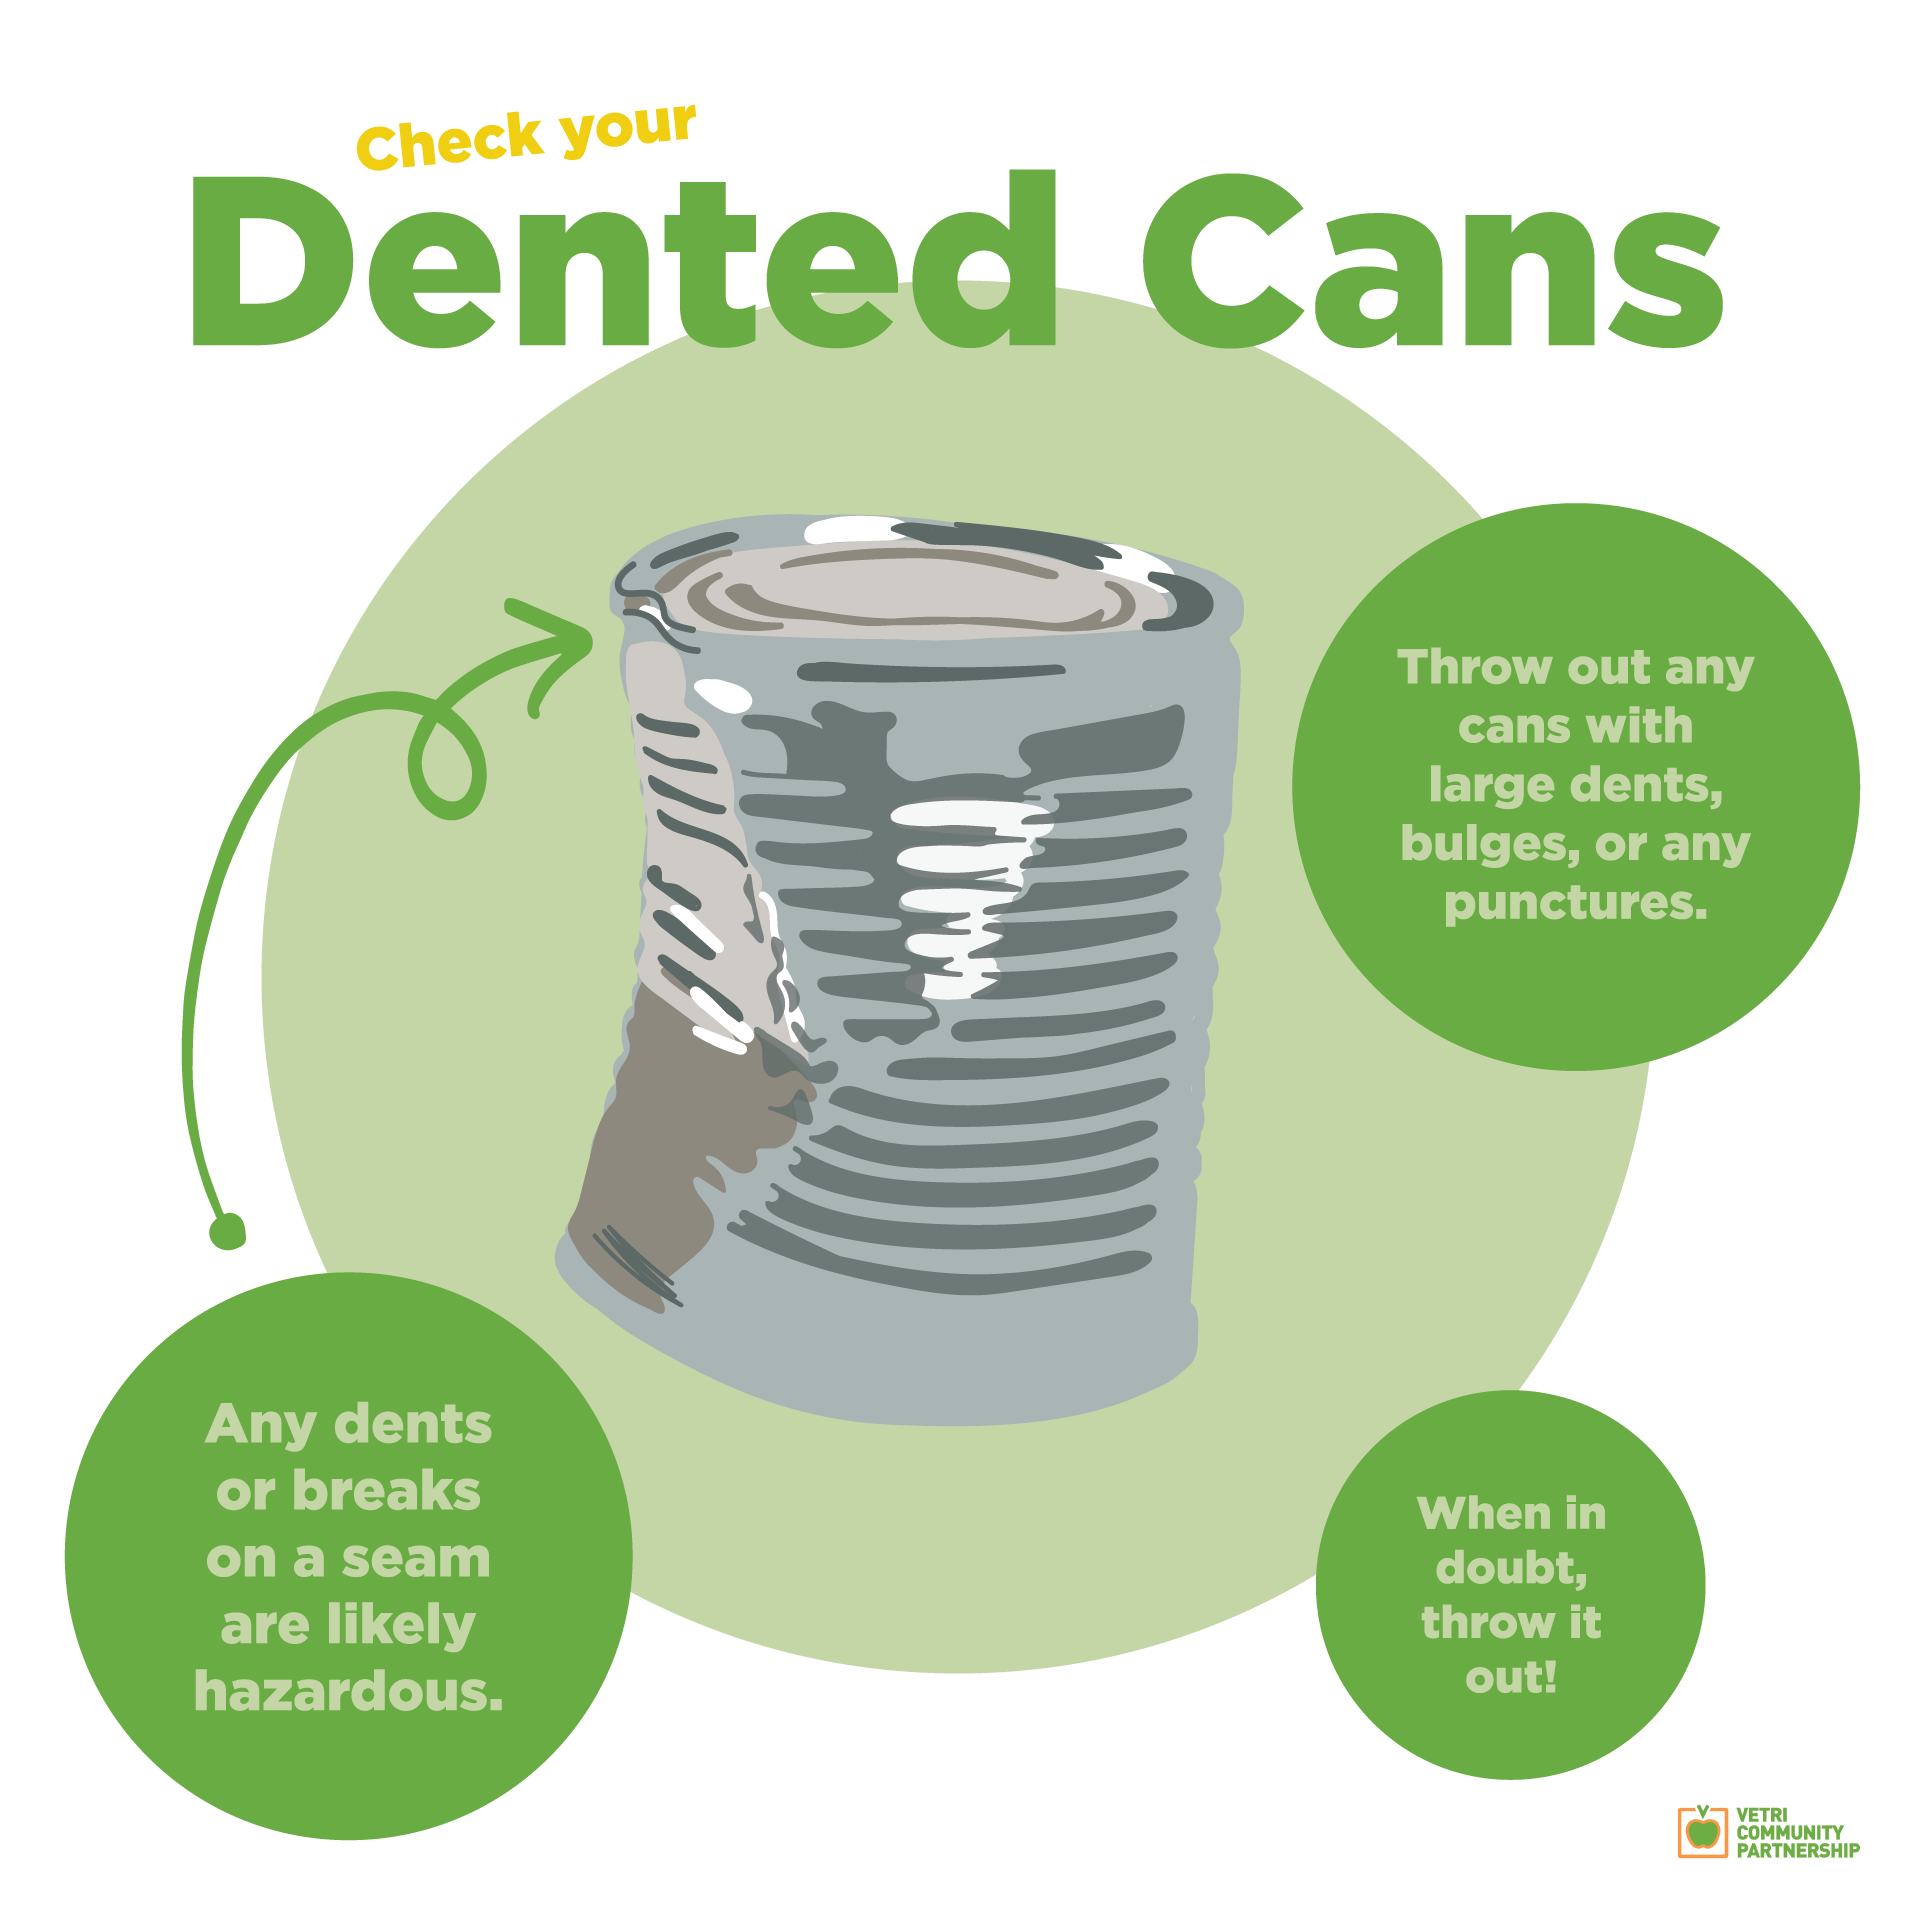 https://vetricommunity.org/news/nutritional-benefits-of-canned-food/dented-cans/